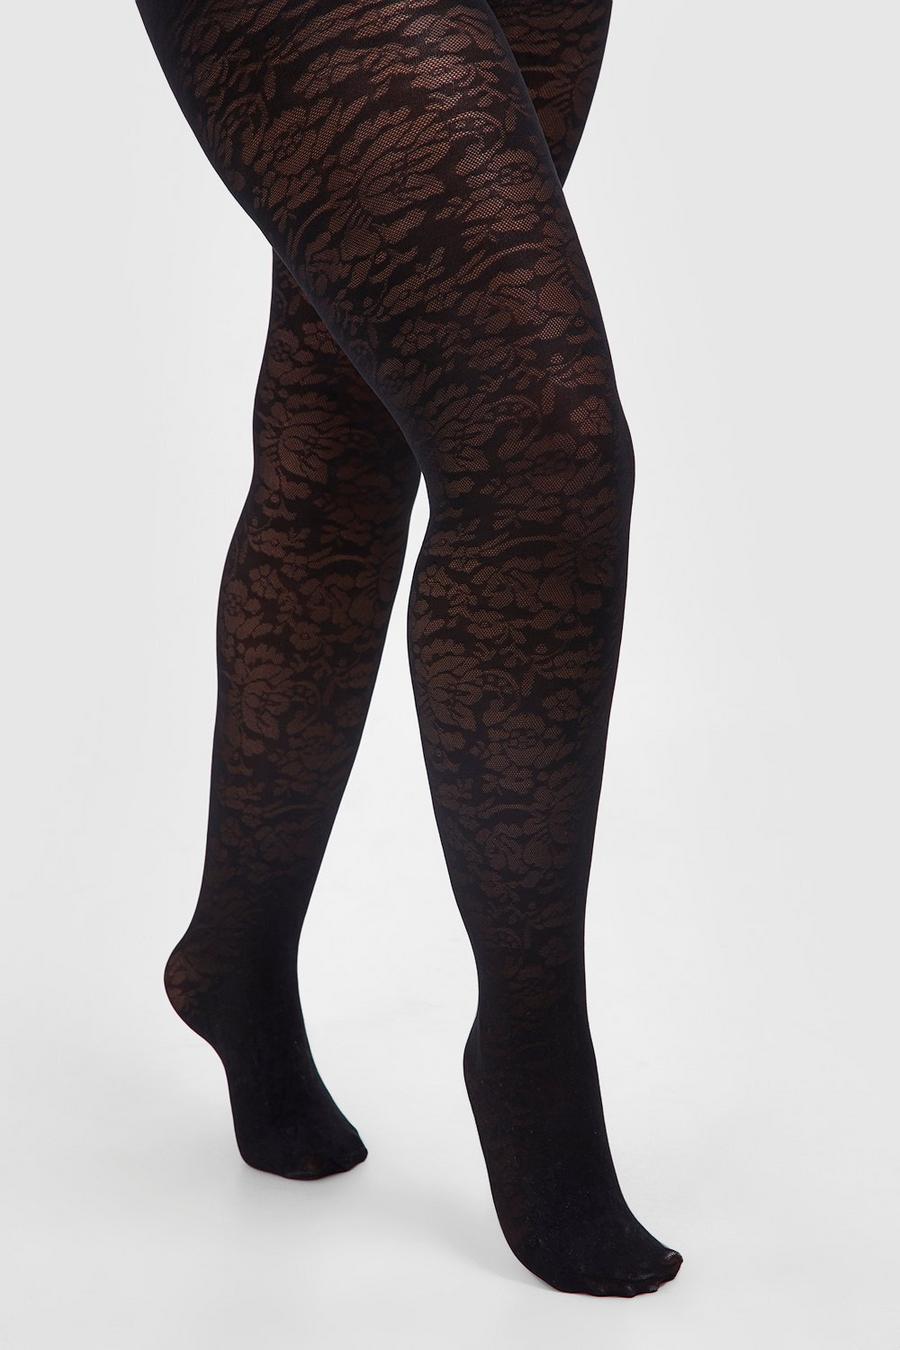 Semi-sheer Tights with Sparkly Lace Pattern 40